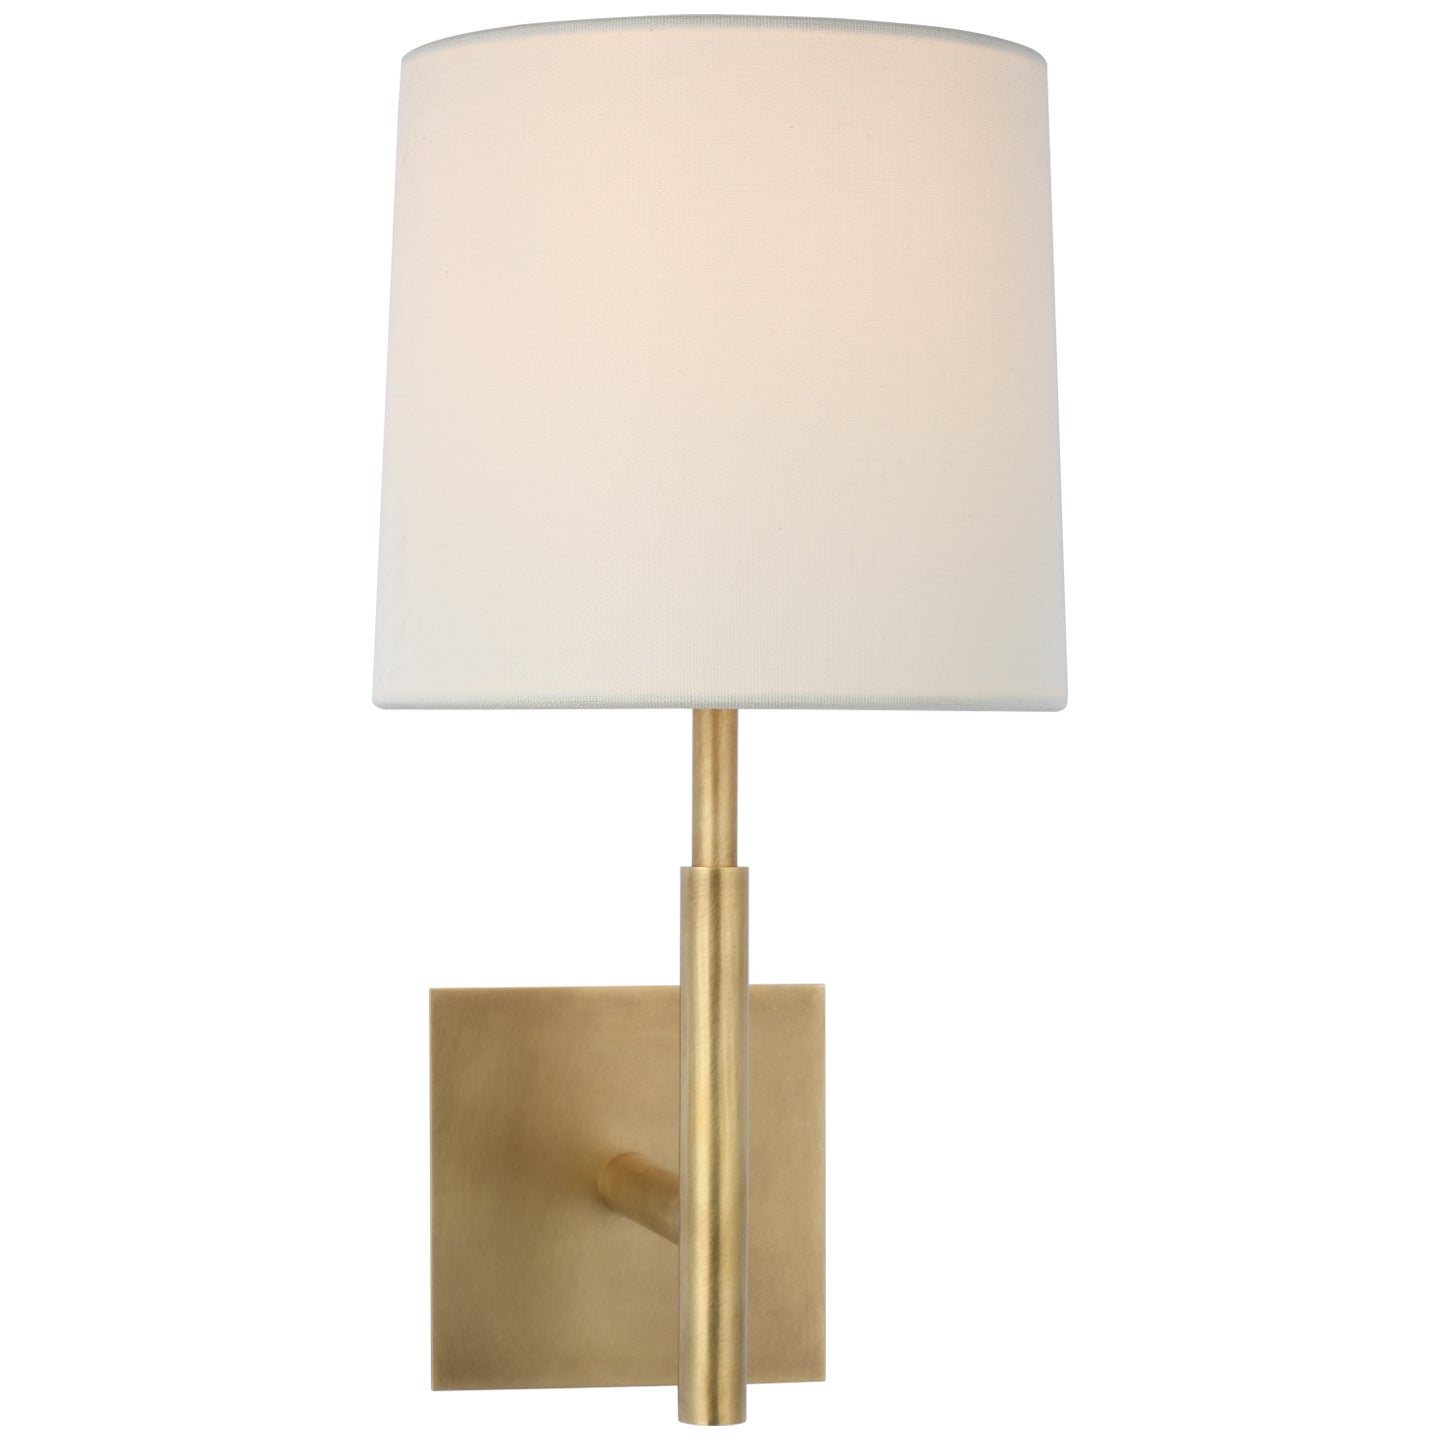 Visual Comfort Signature - BBL 2170SB-L - LED Wall Sconce - Clarion - Soft Brass